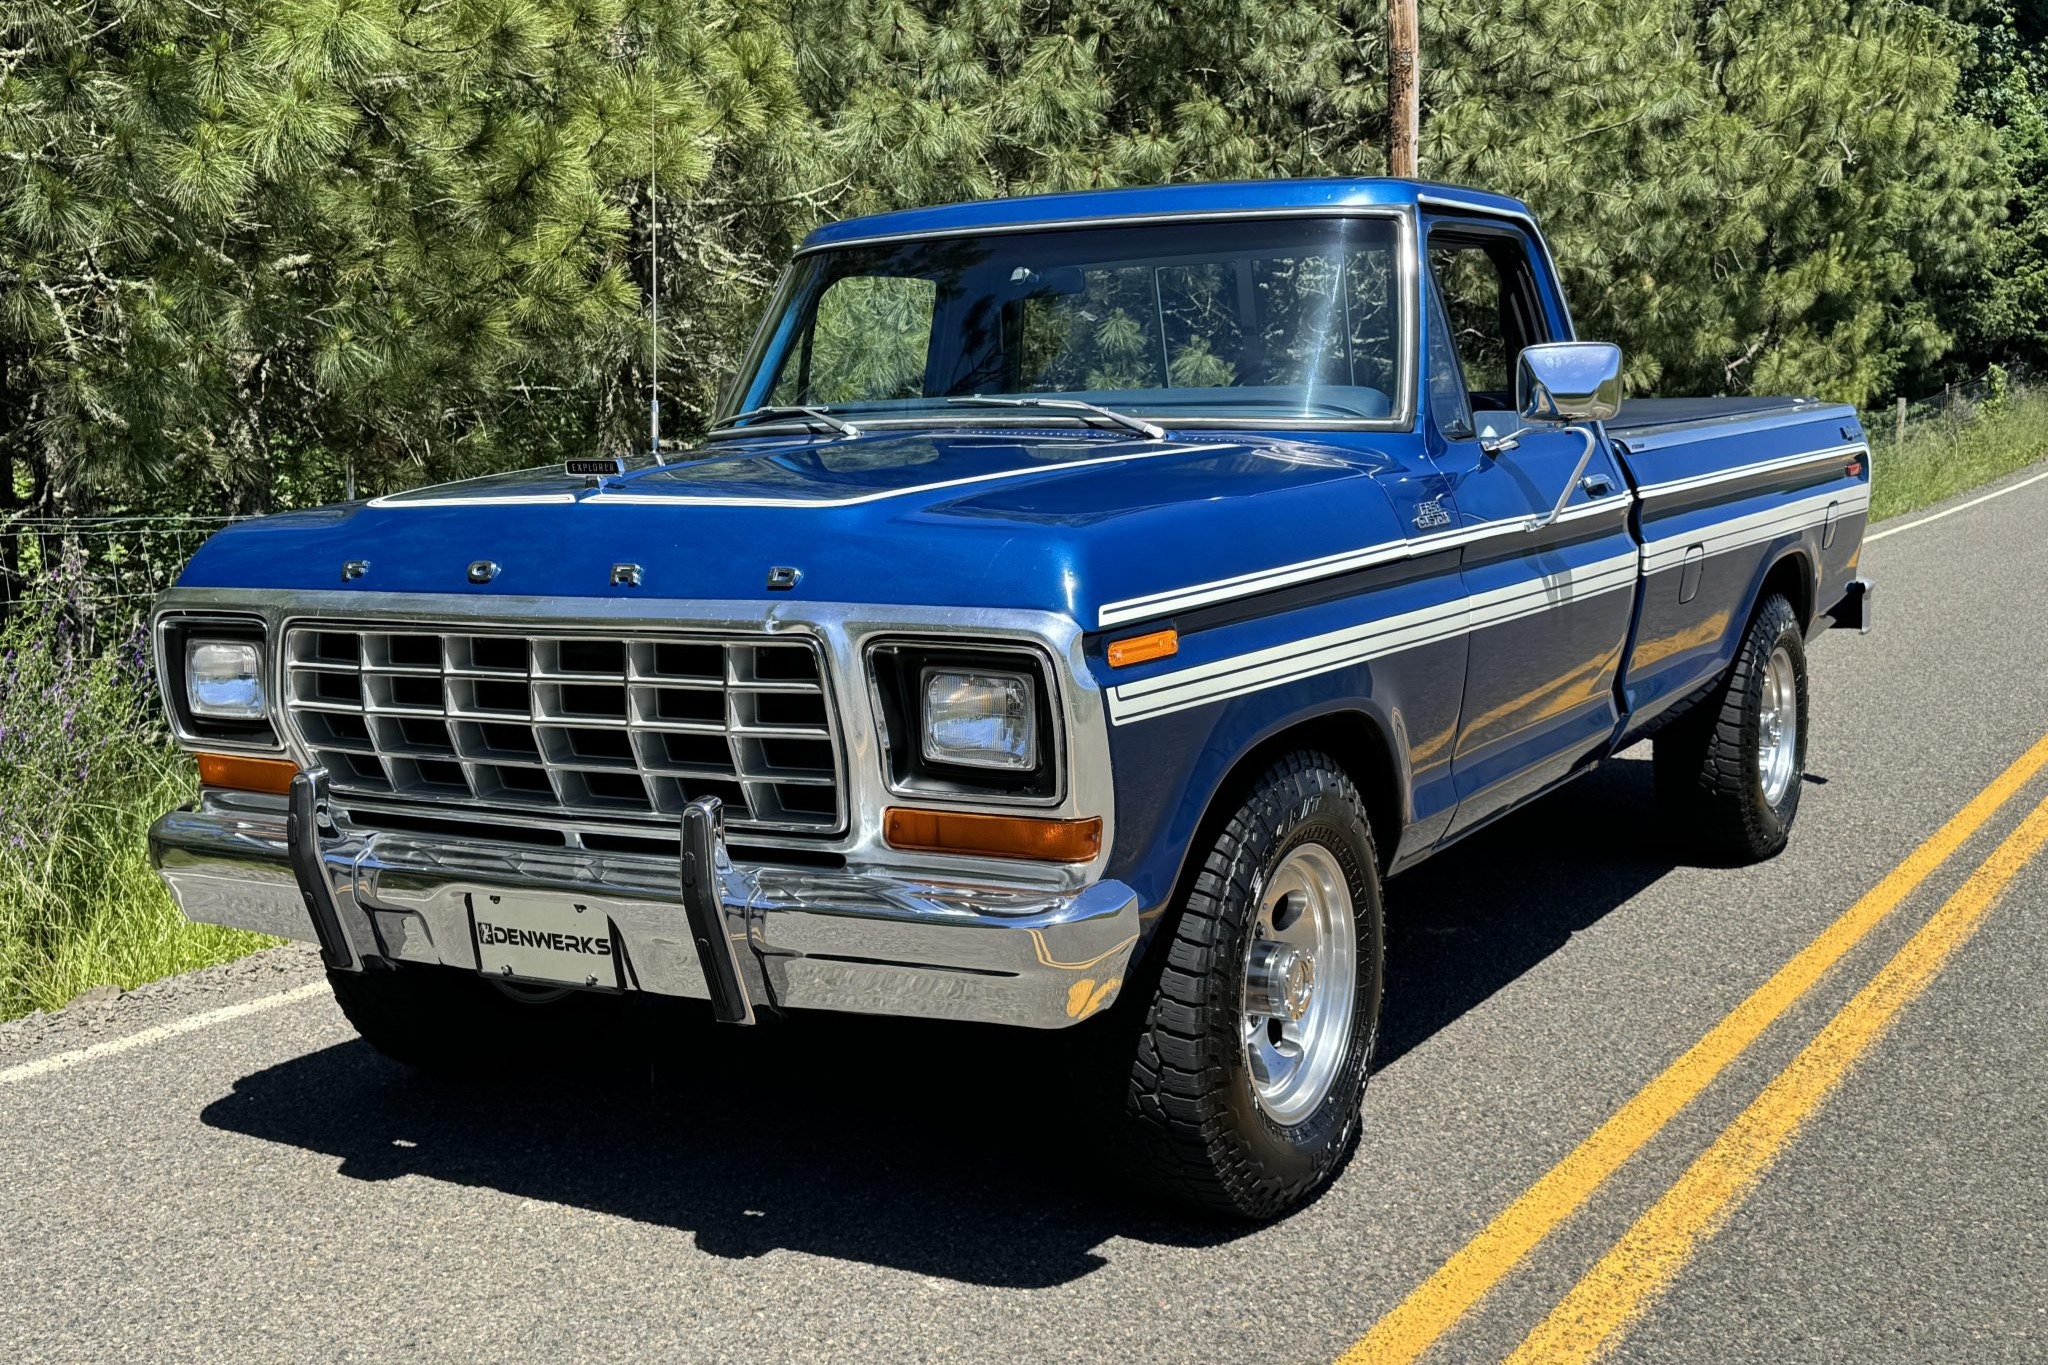 Used 1979 Ford F-250 Custom Explorer Review